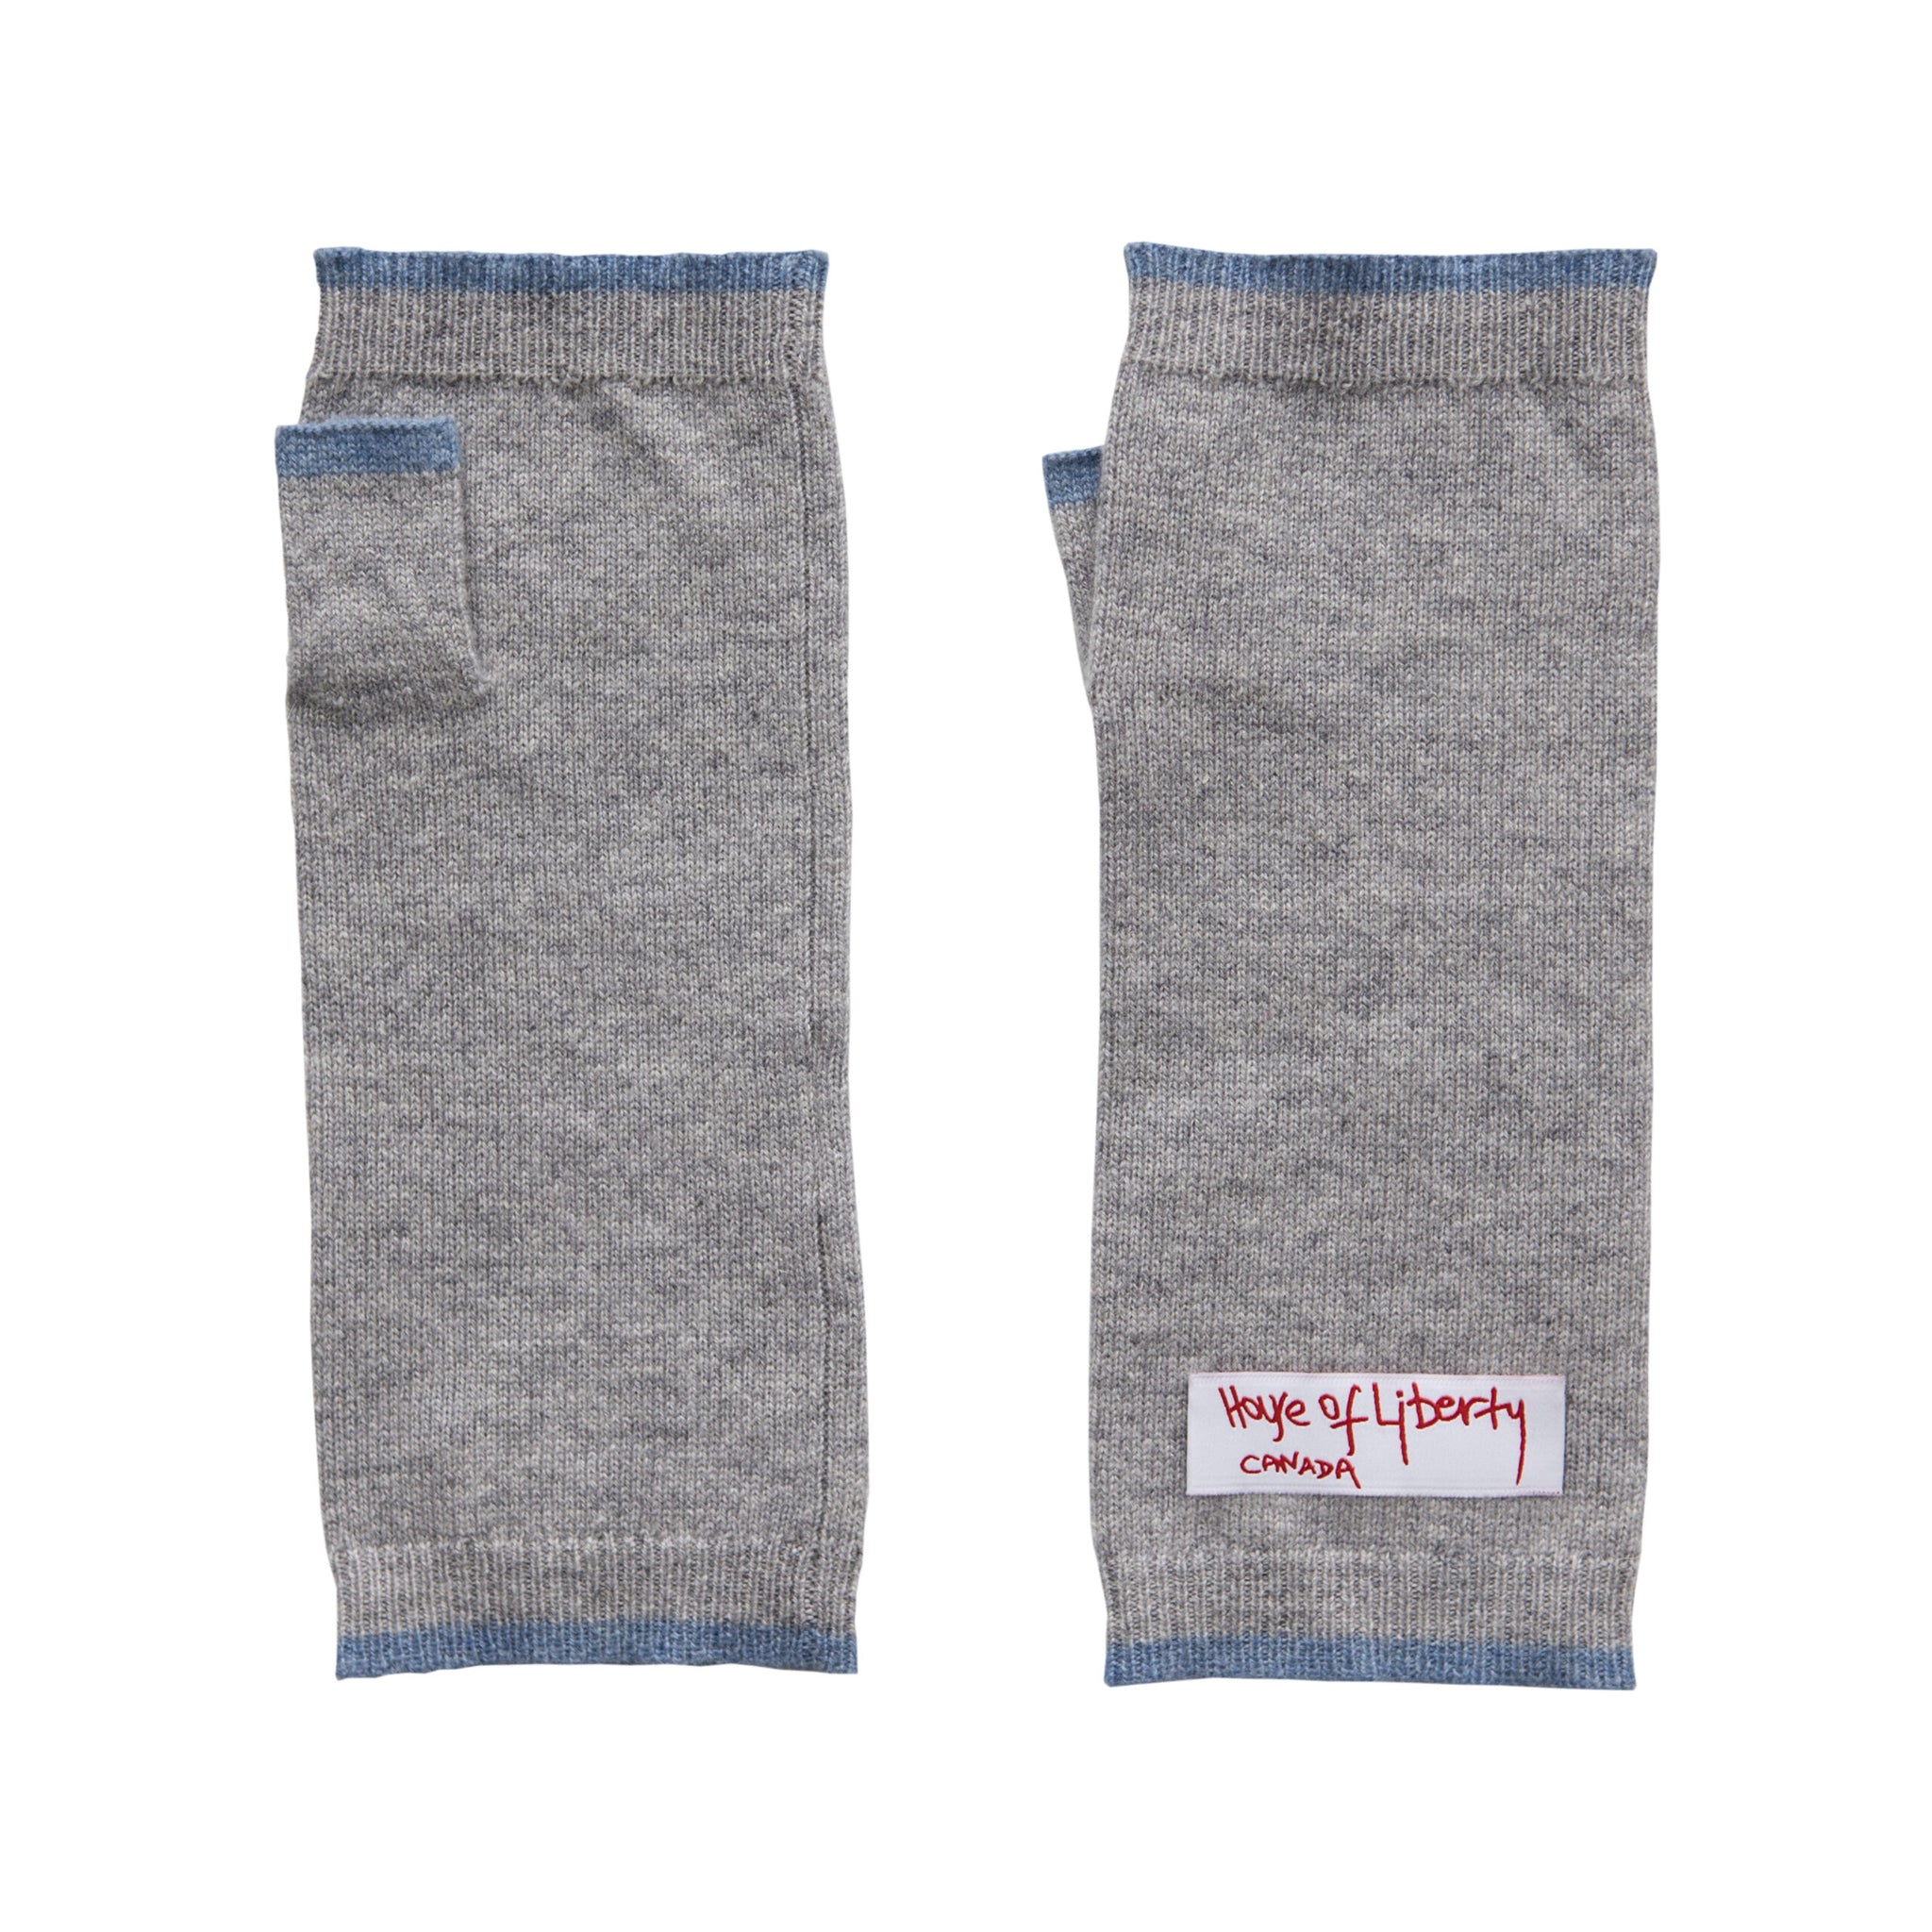 UNIKONCEPT Lifestyle Boutique and Lounge; House of Liberty Cashmere knit Tris Fingerless Gloves in Grey with Jean Blue